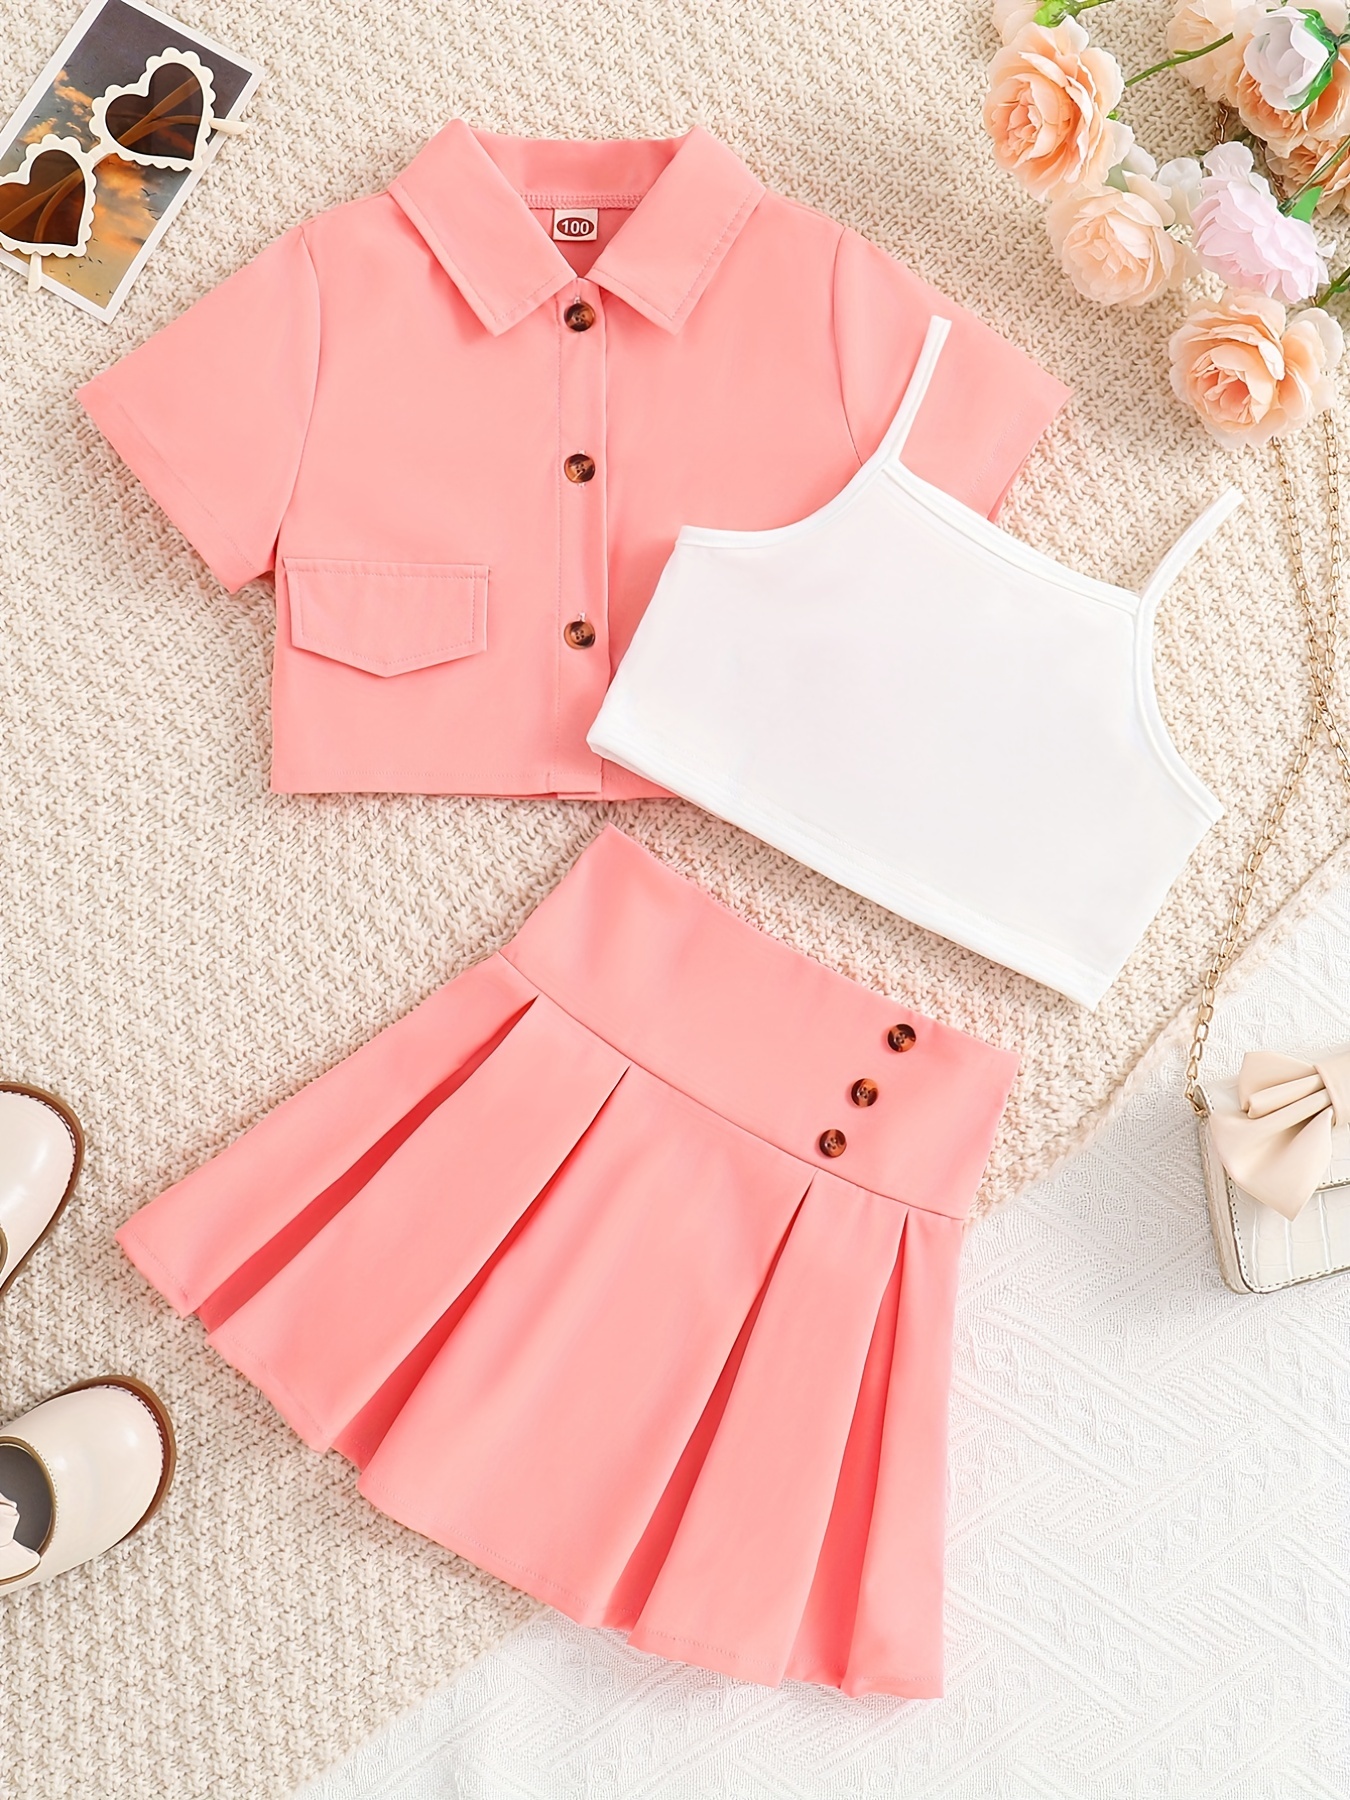 In-Stock] 1/6 Female Shirt & Pleated Skirt Clothes Set Fit 12